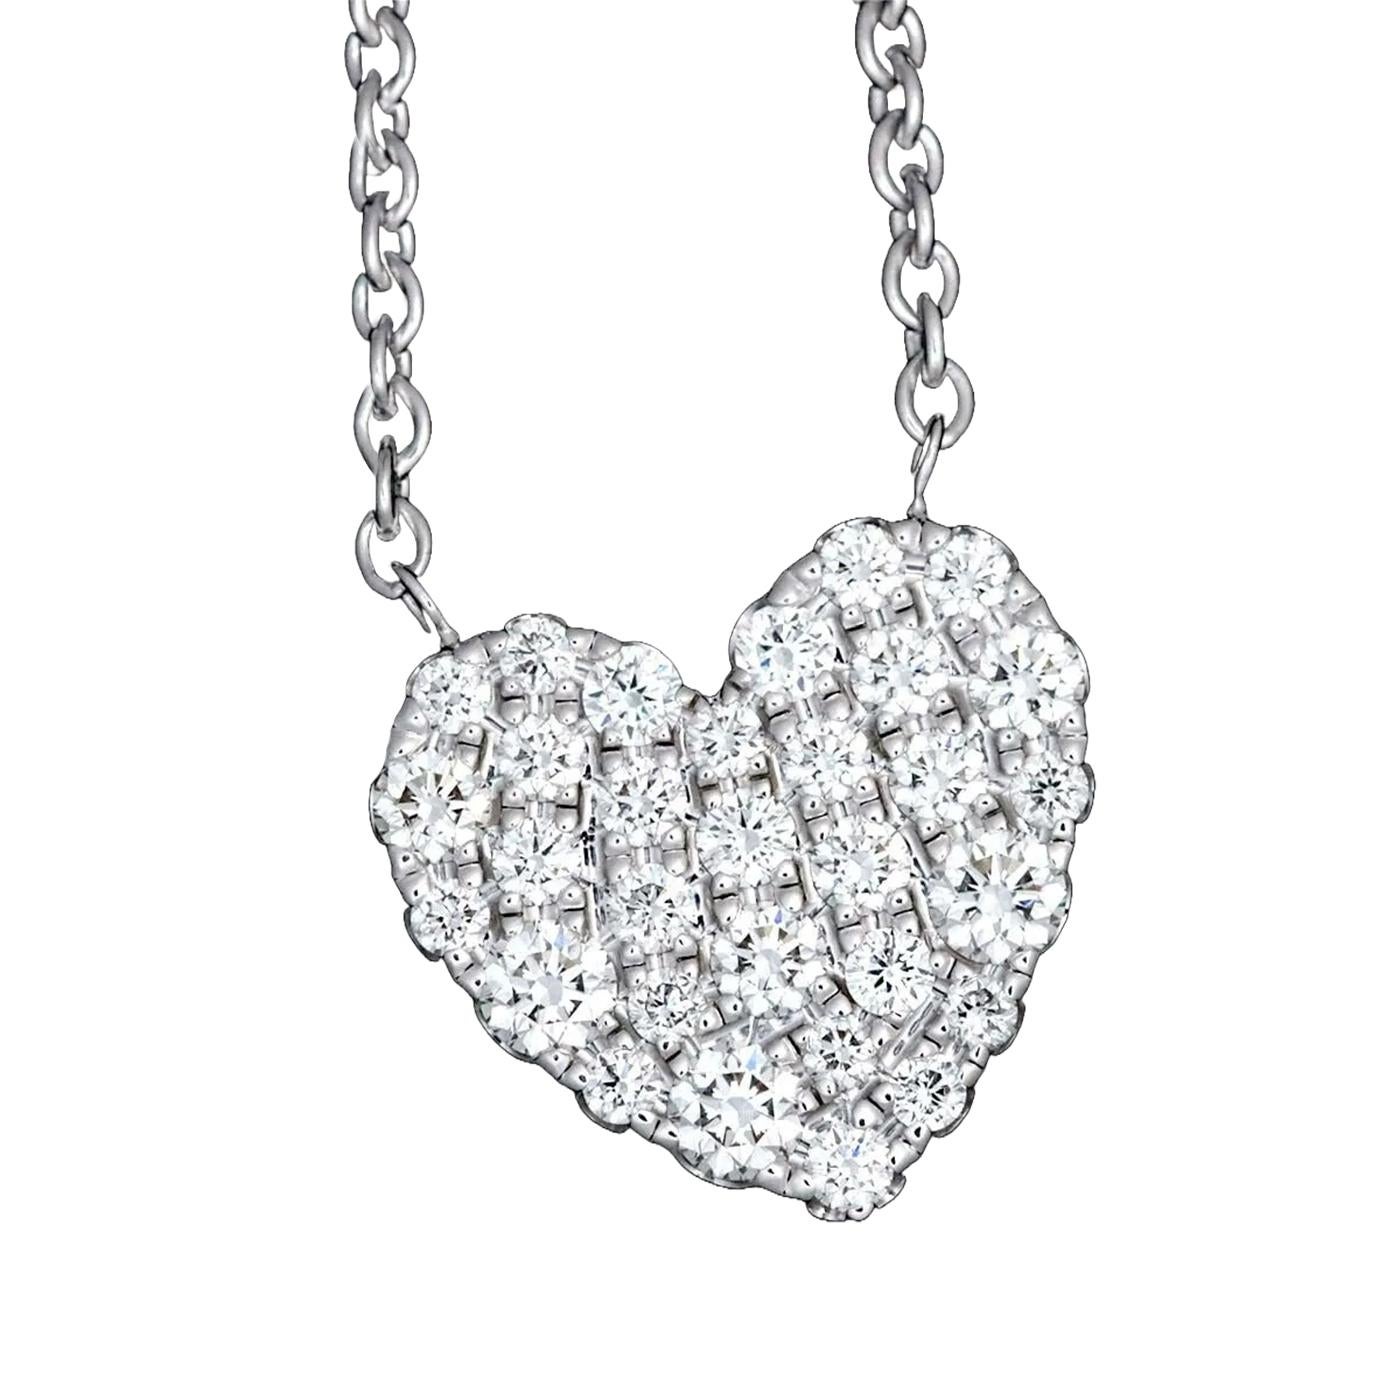 Tiffany & Co. Metro Heart Pave Diamond Necklace 750 Engraved 18K White Gold For Sale 1